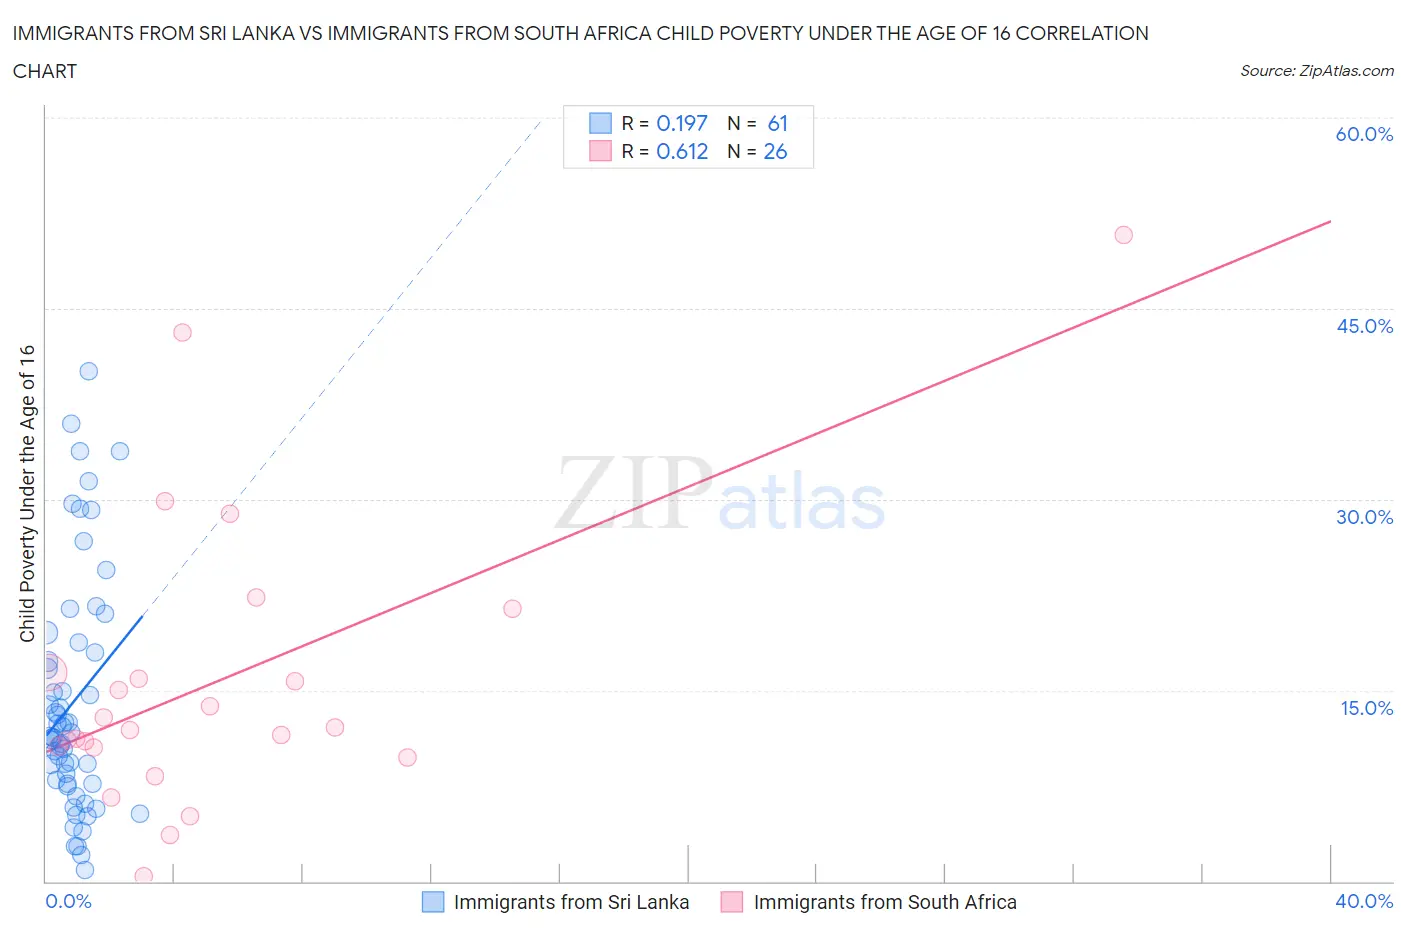 Immigrants from Sri Lanka vs Immigrants from South Africa Child Poverty Under the Age of 16